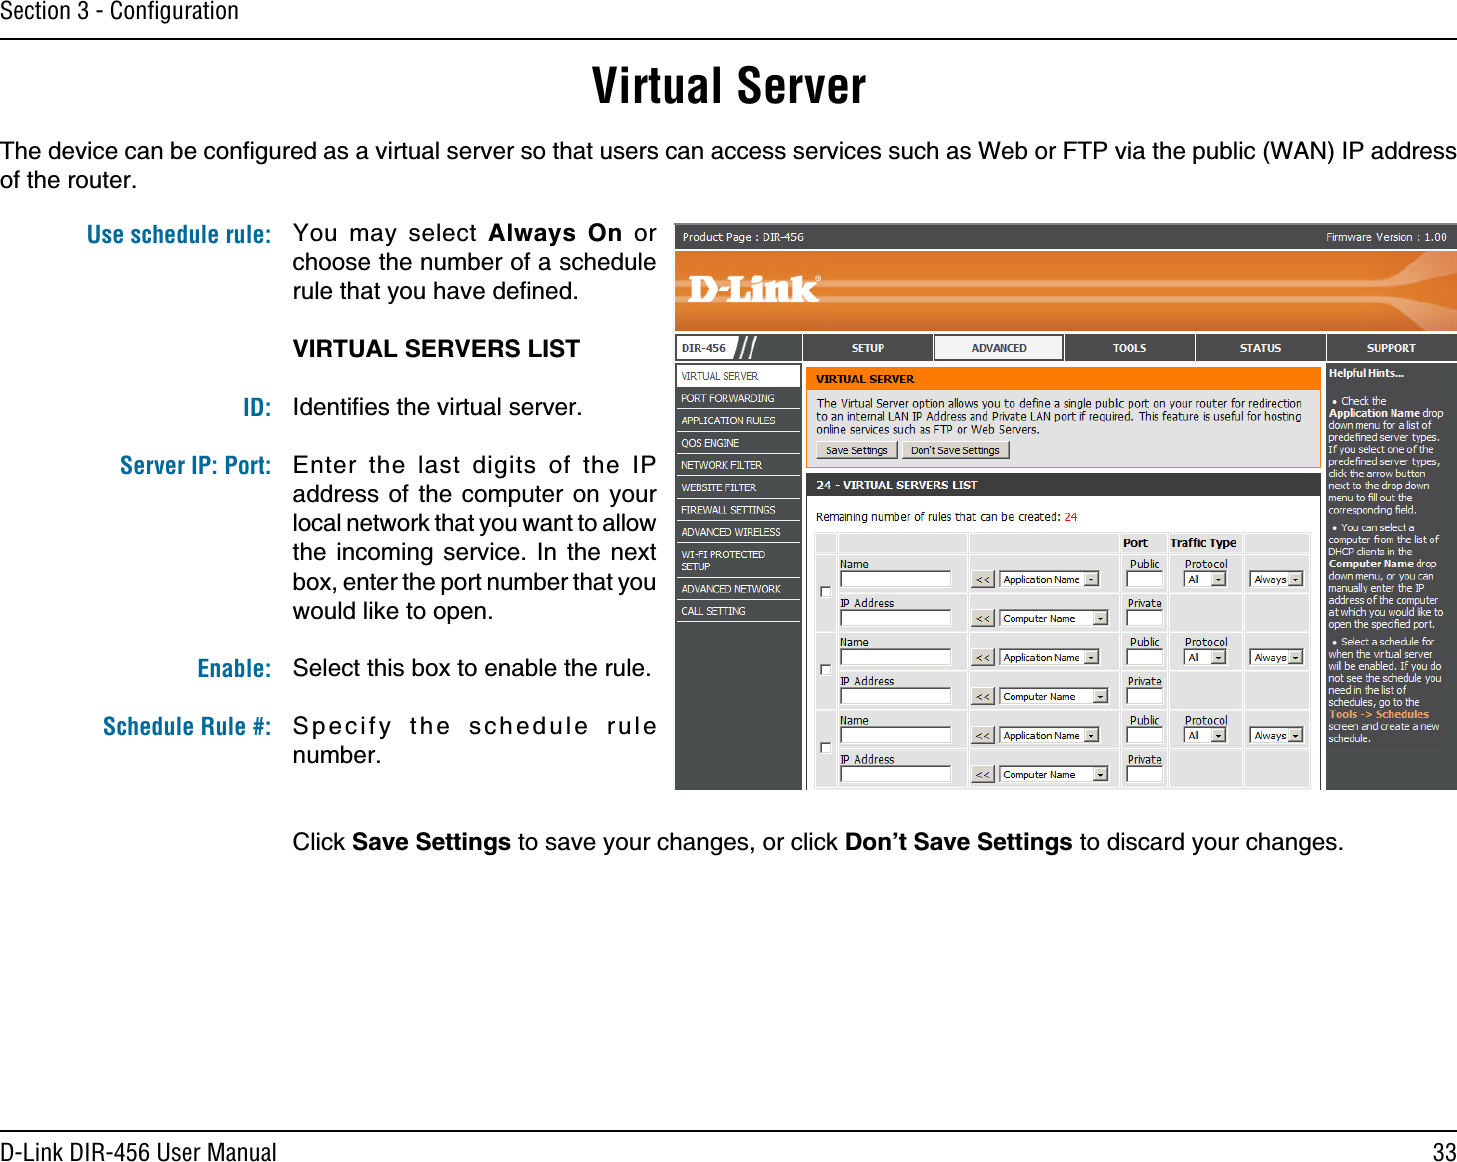 33D-Link DIR-456 User ManualSection 3 - ConﬁgurationVirtual ServerThe device can be conﬁgured as a virtual server so that users can access services such as Web or FTP via the public (WAN) IP address of the router. You may select Always On or choose the number of a schedule rule that you have deﬁned.VIRTUAL SERVERS LISTIdentiﬁes the virtual server.Enter the last digits of the IP address of the computer on your local network that you want to allow the incoming service. In the next box, enter the port number that you would like to open.Select this box to enable the rule.Specify the schedule rule number. Click Save Settings to save your changes, or click Don’t Save Settings to discard your changes.Use schedule rule:ID:Server IP: Port: Enable:Schedule Rule #: